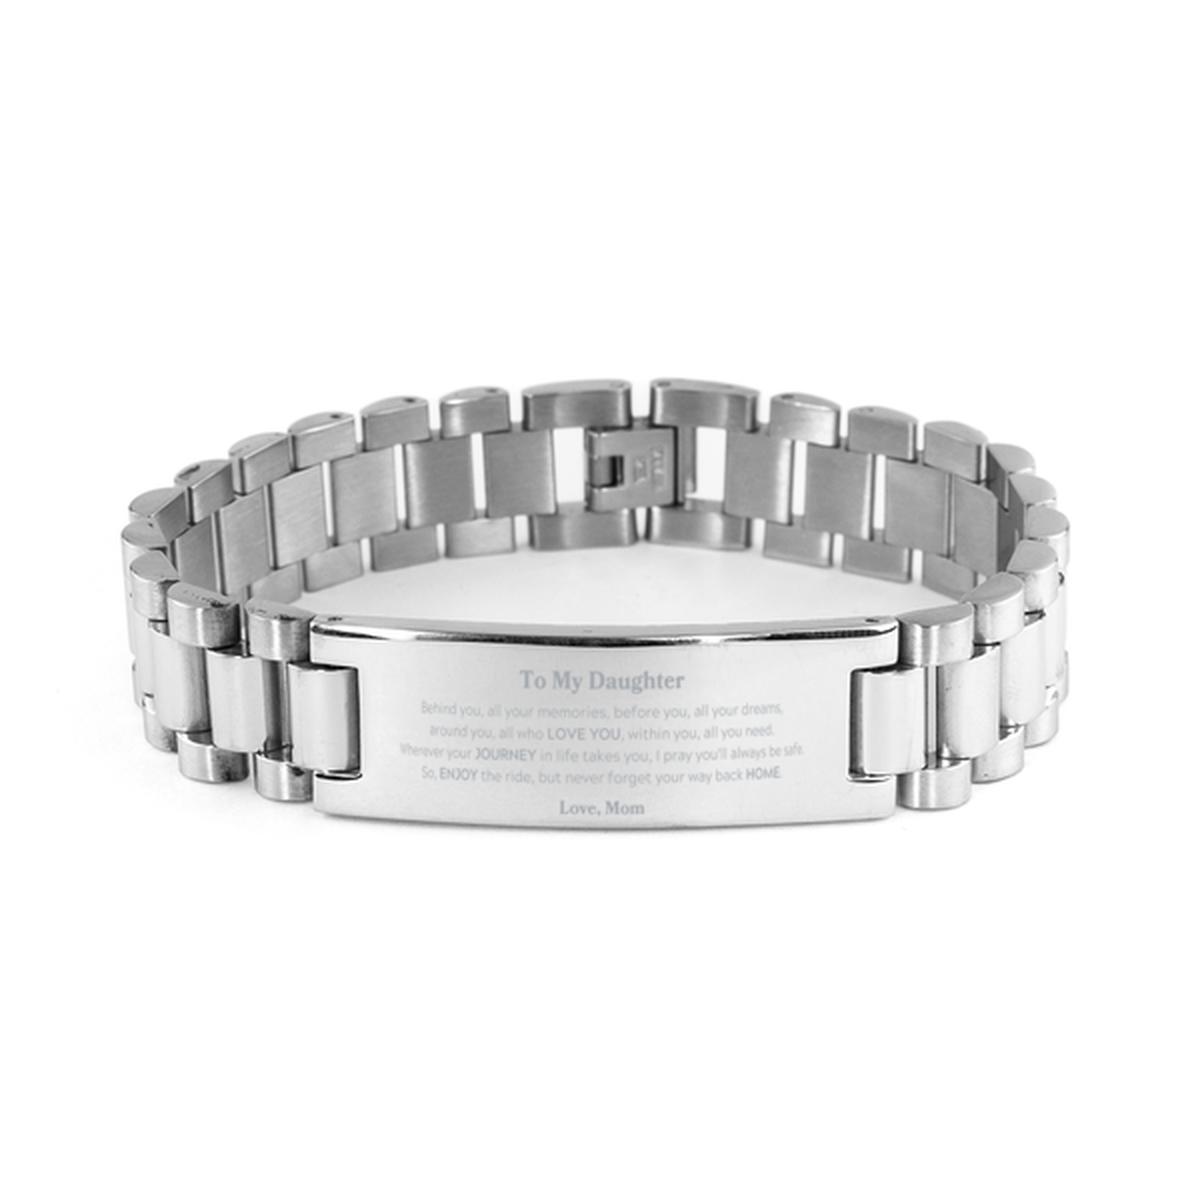 To My Daughter Graduation Gifts from Mom, Daughter Ladder Stainless Steel Bracelet Christmas Birthday Gifts for Daughter Behind you, all your memories, before you, all your dreams. Love, Mom